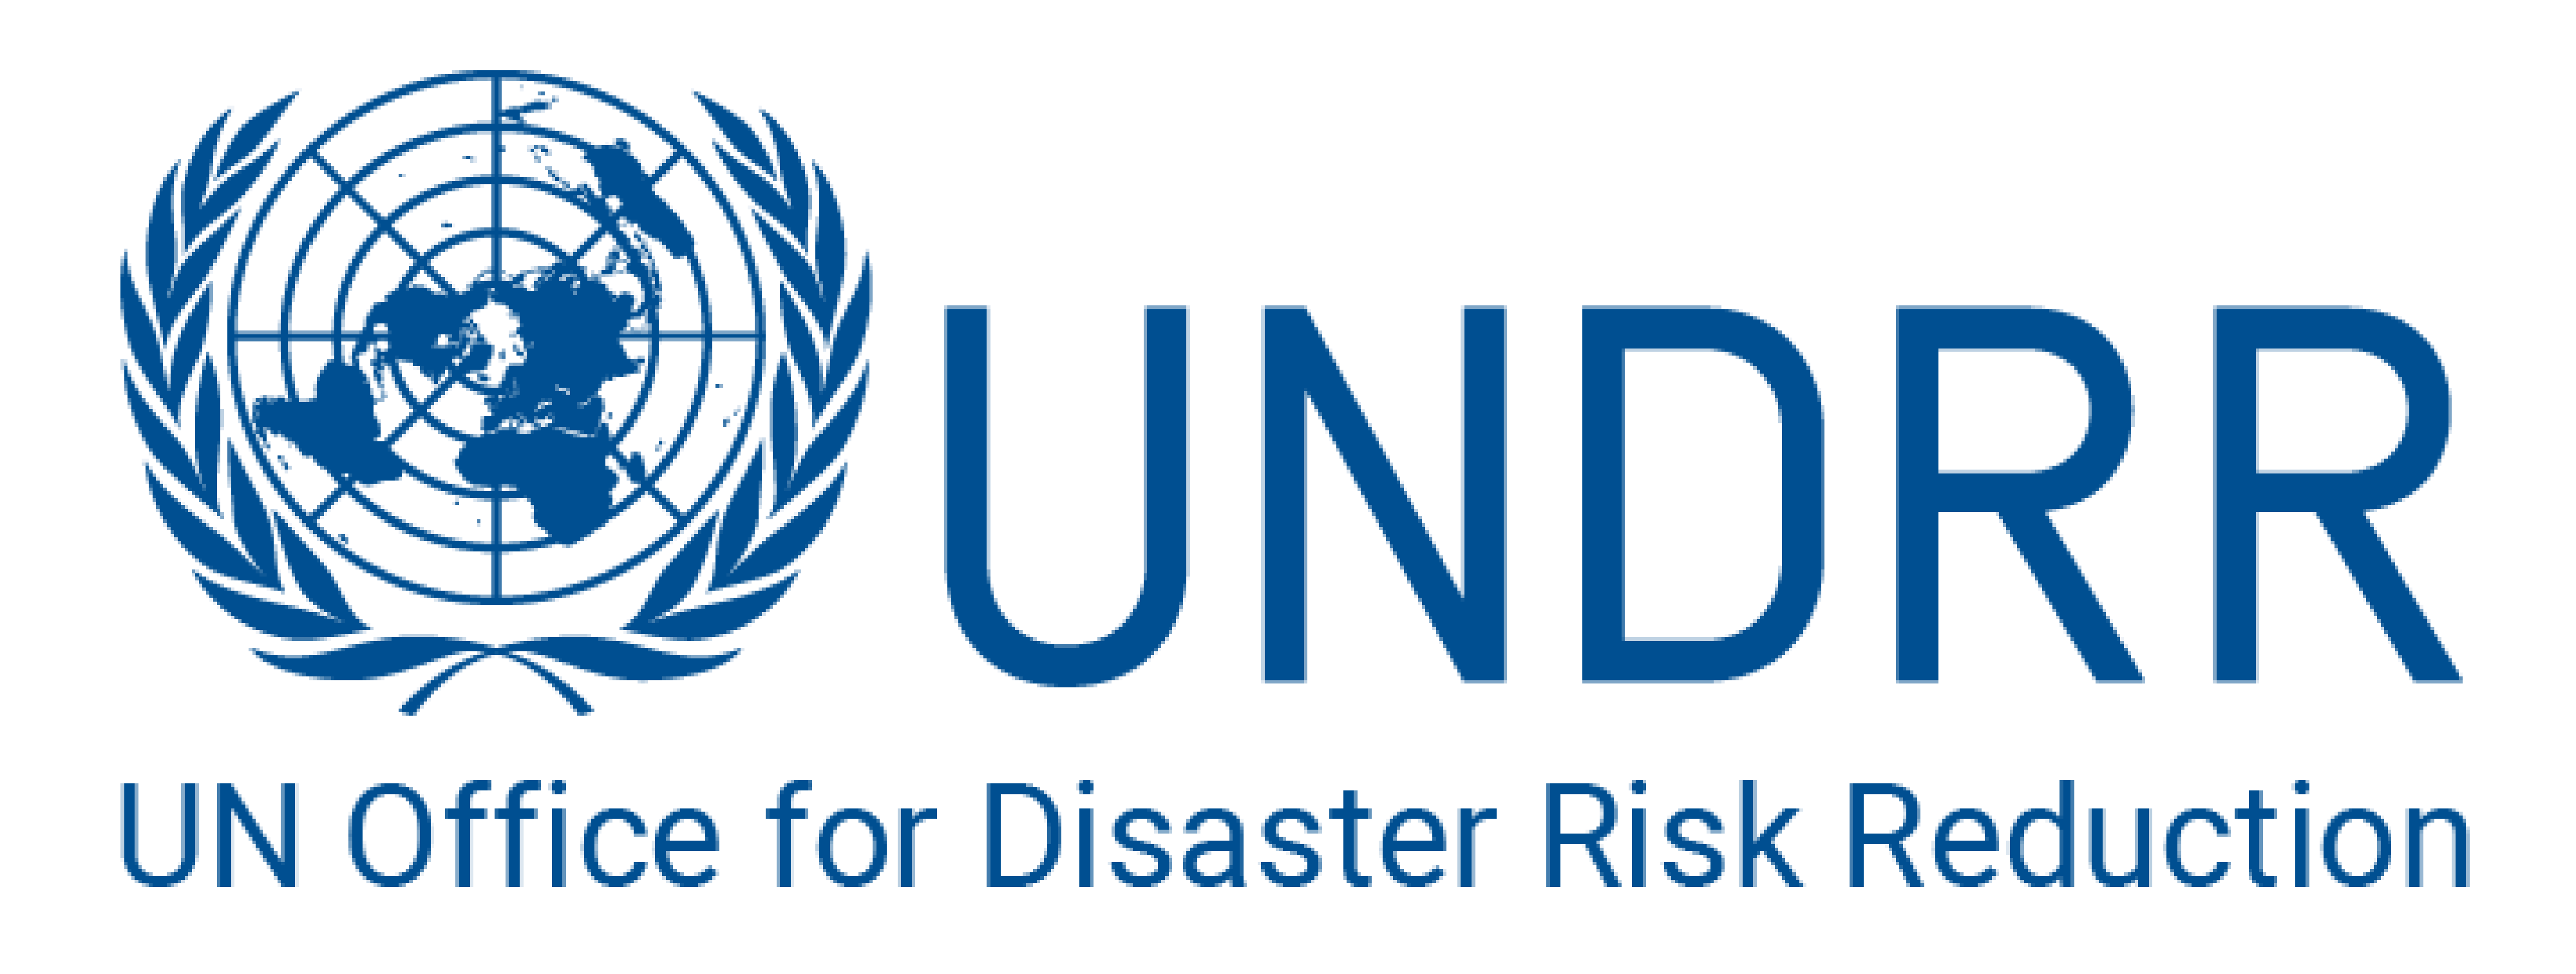 UNDRR - UN Office for Disaster Risk Reduction